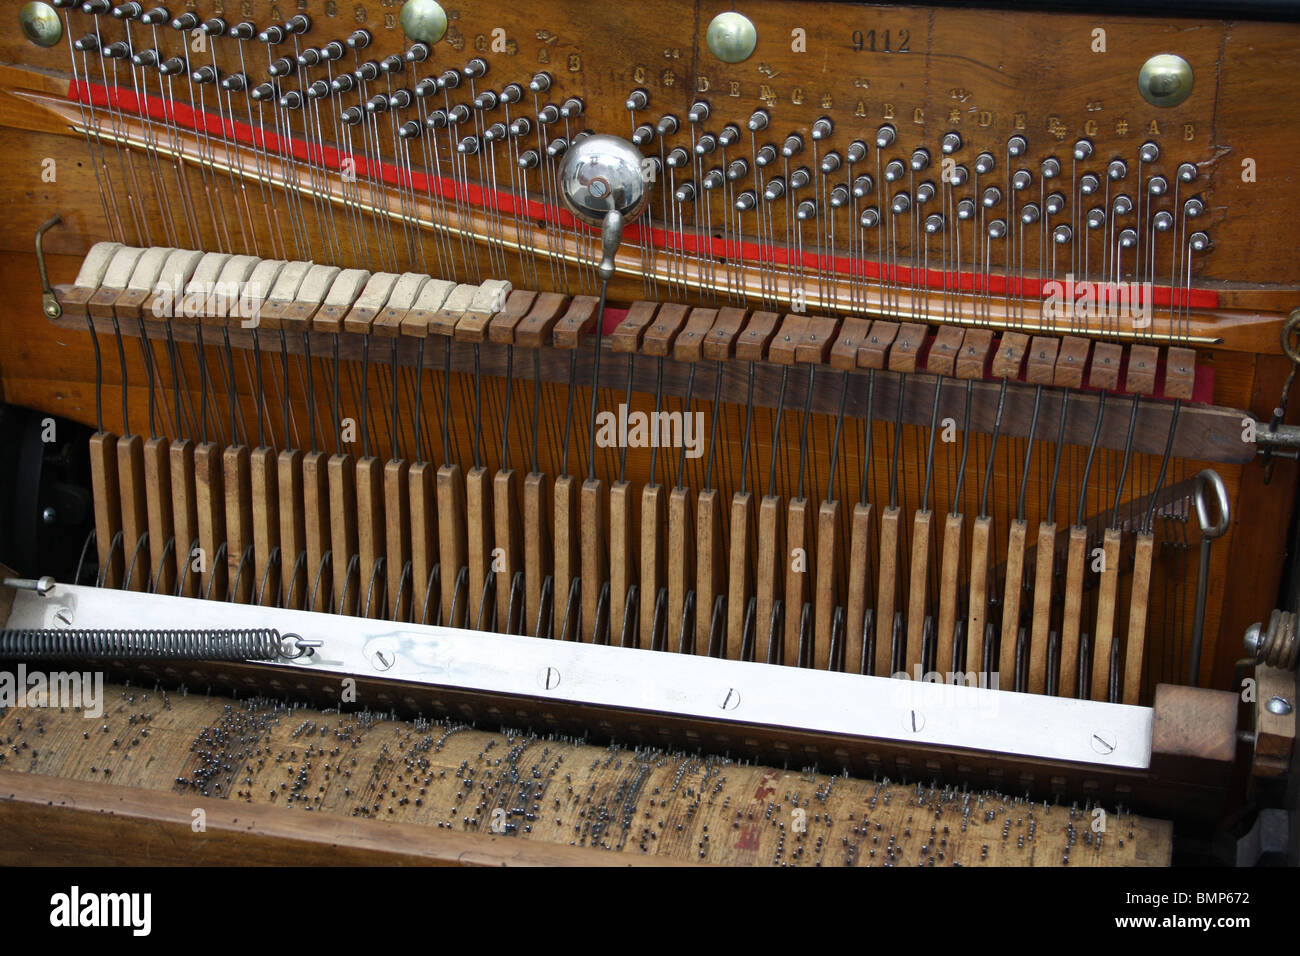 Detail of player piano driven by pinned wheel. Stock Photo